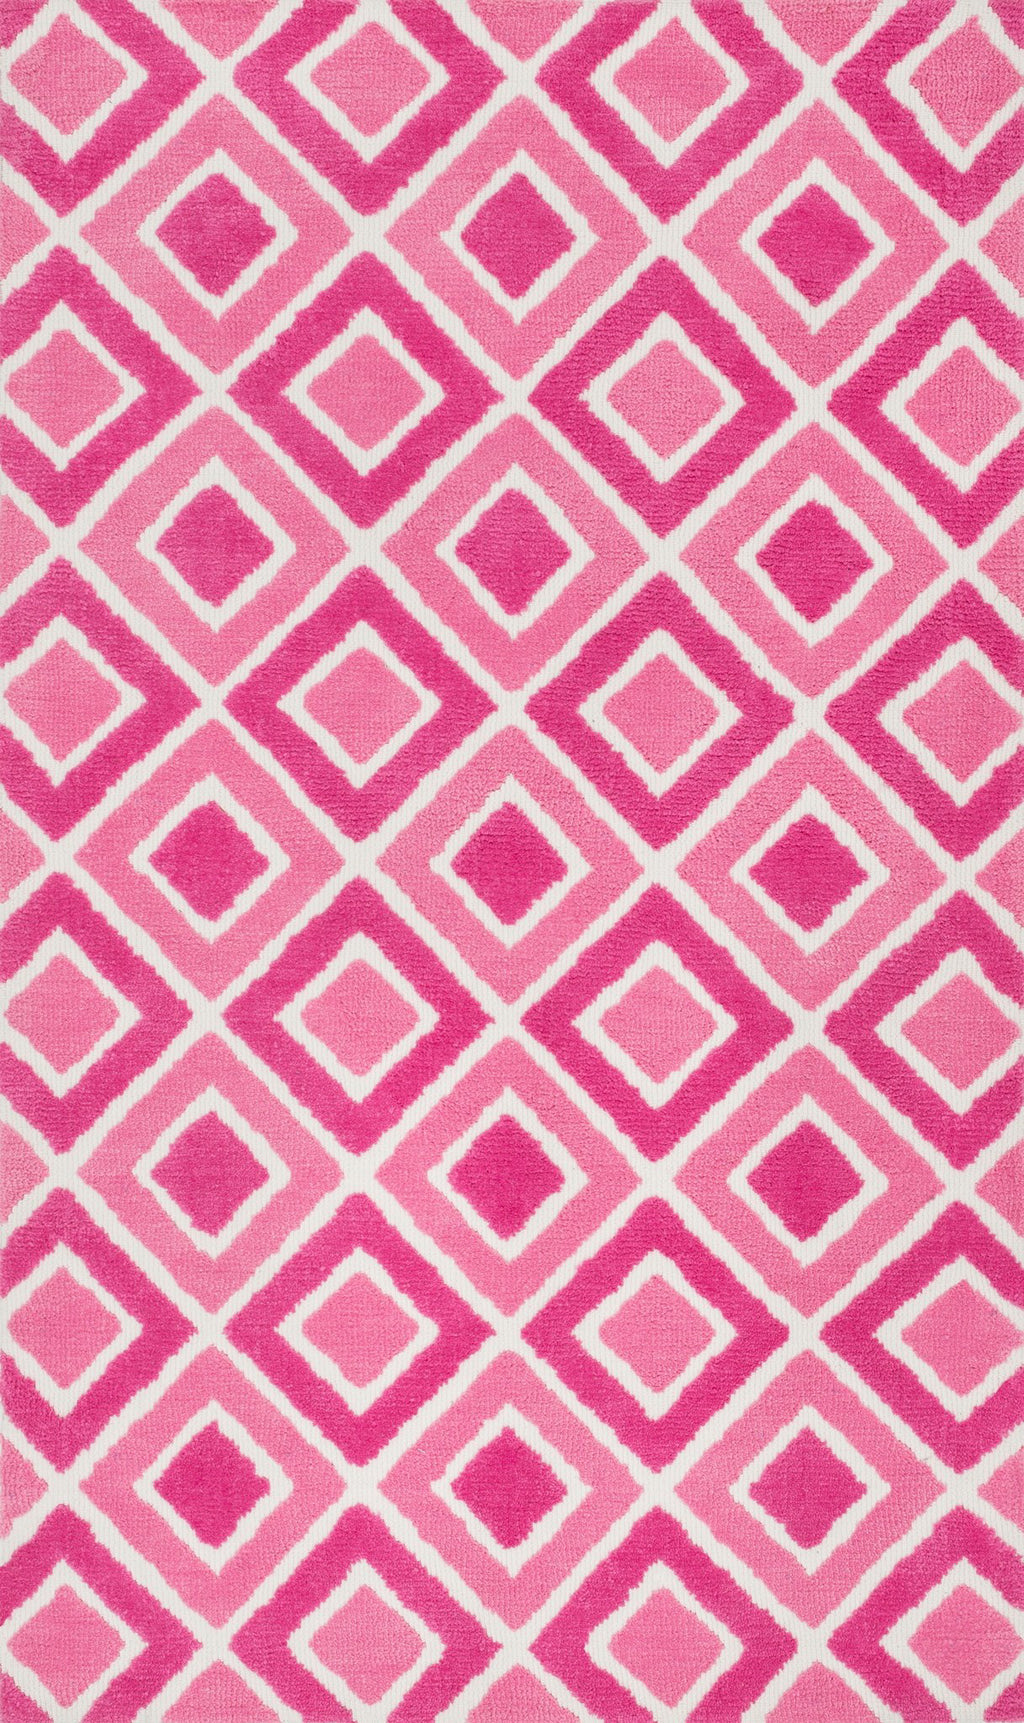 Loloi Zoey HZO04 Pink Area Rug main image